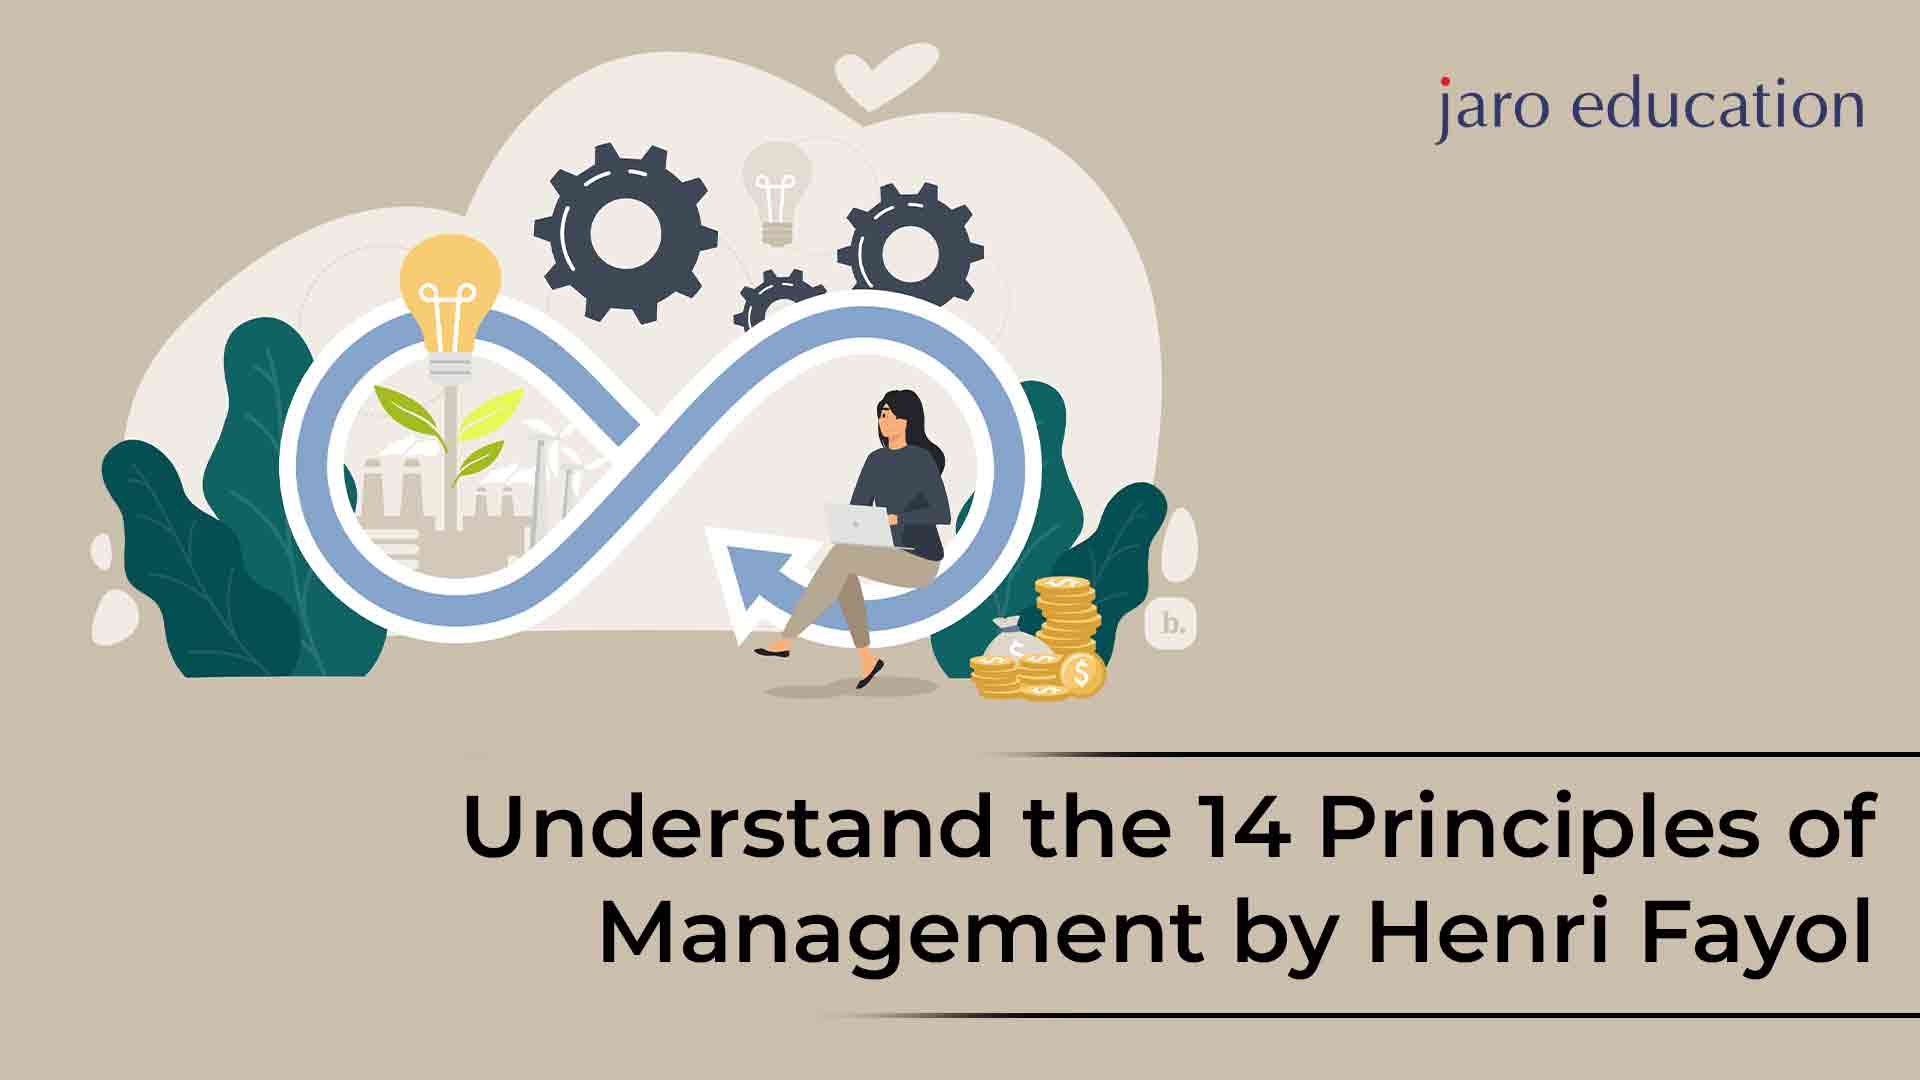 Understand the 14 Principles of Management by Henri Fayol